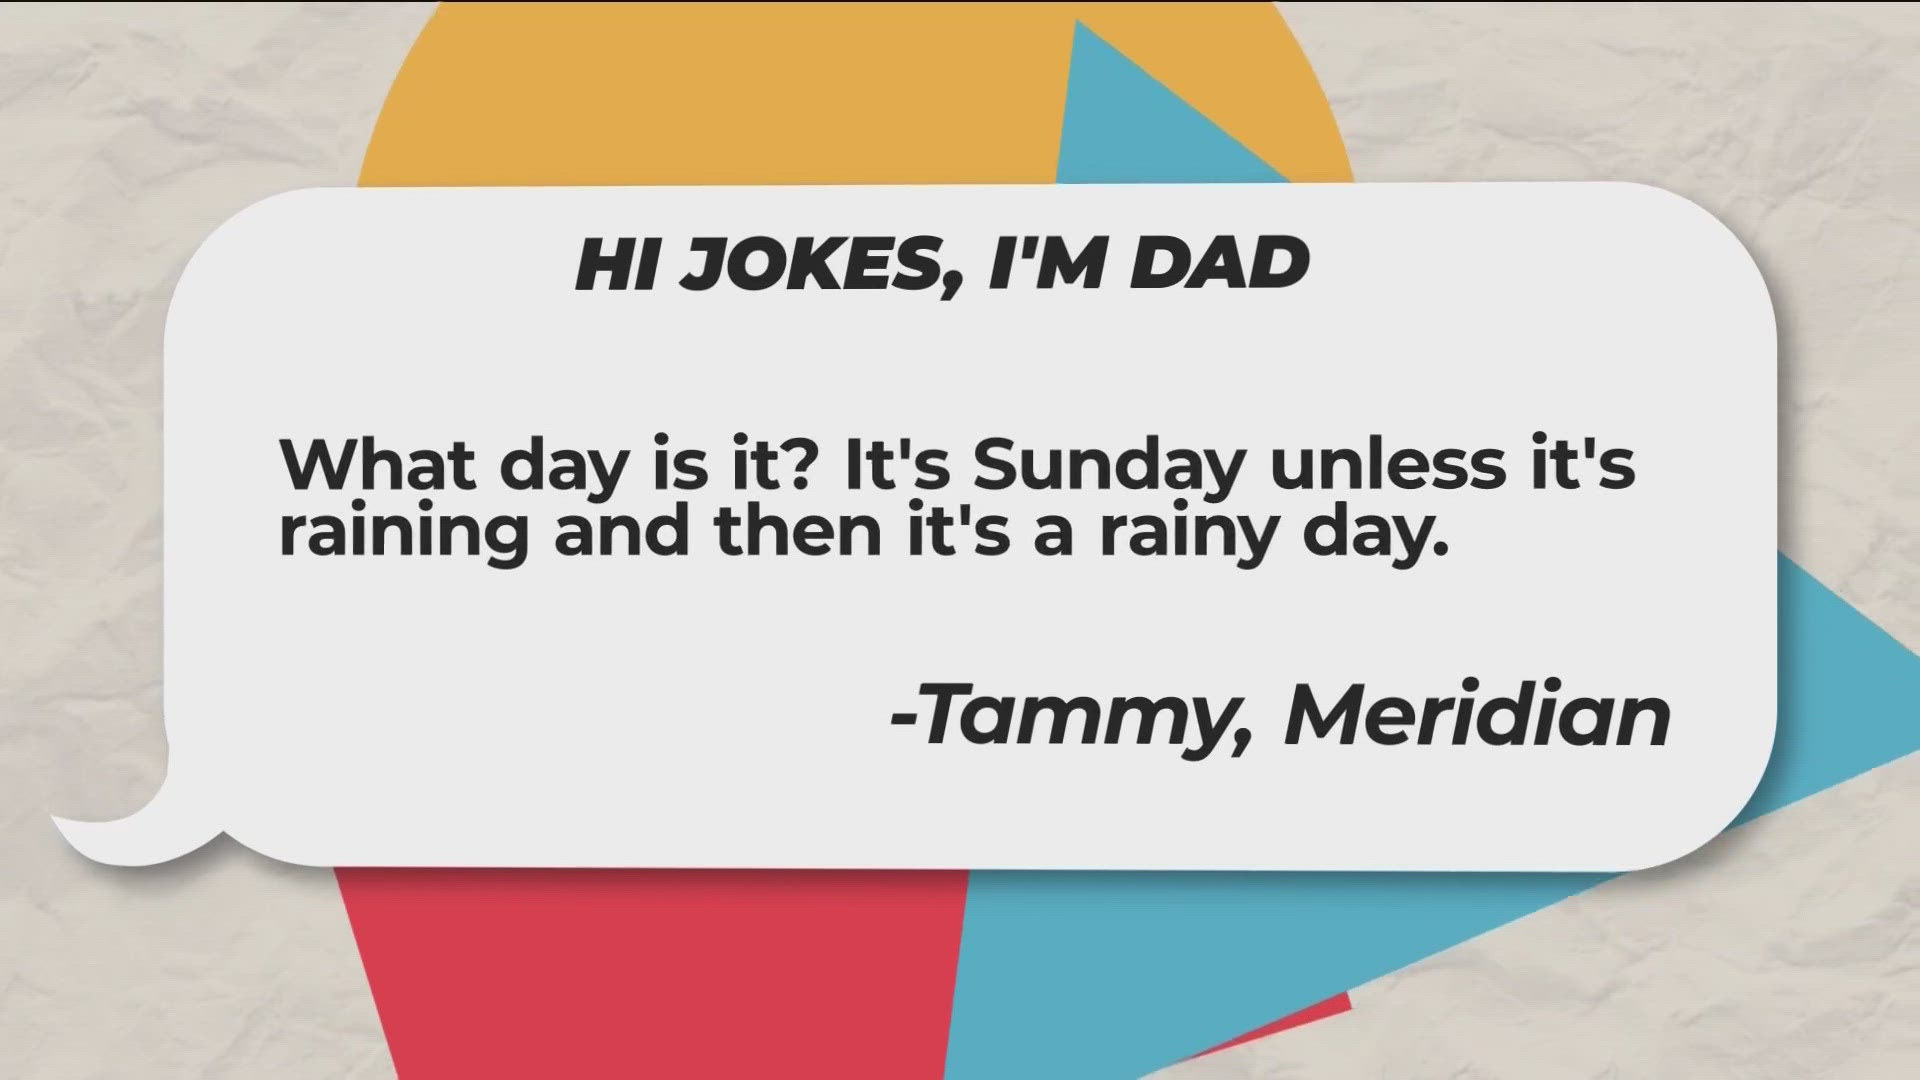 Here are a few more viewer-submitted dad jokes in honor of Father's Day.